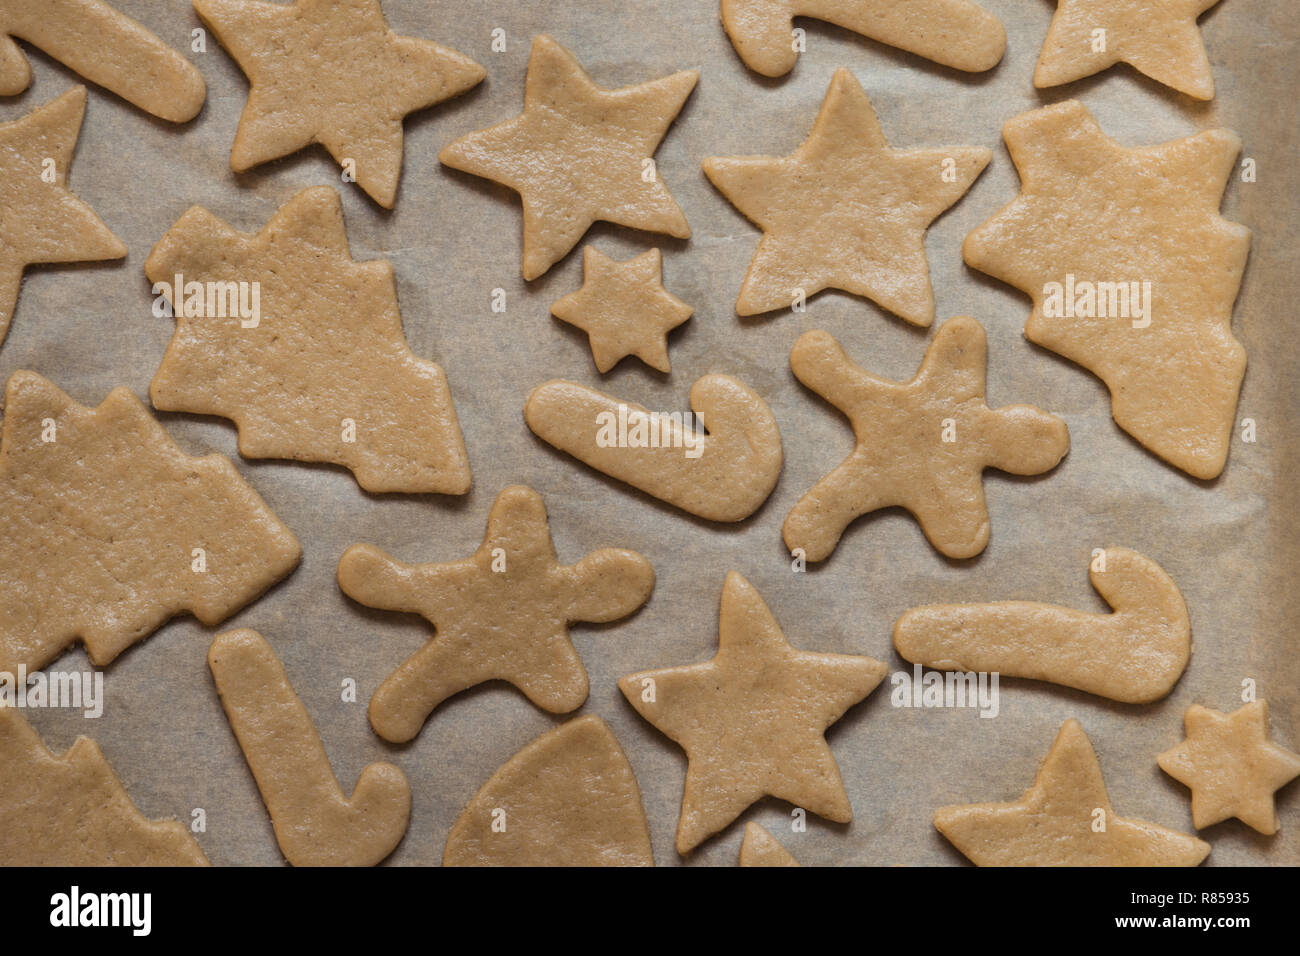 Homemade christmas cookies on parchment. Xmas pattern. Stock Photo